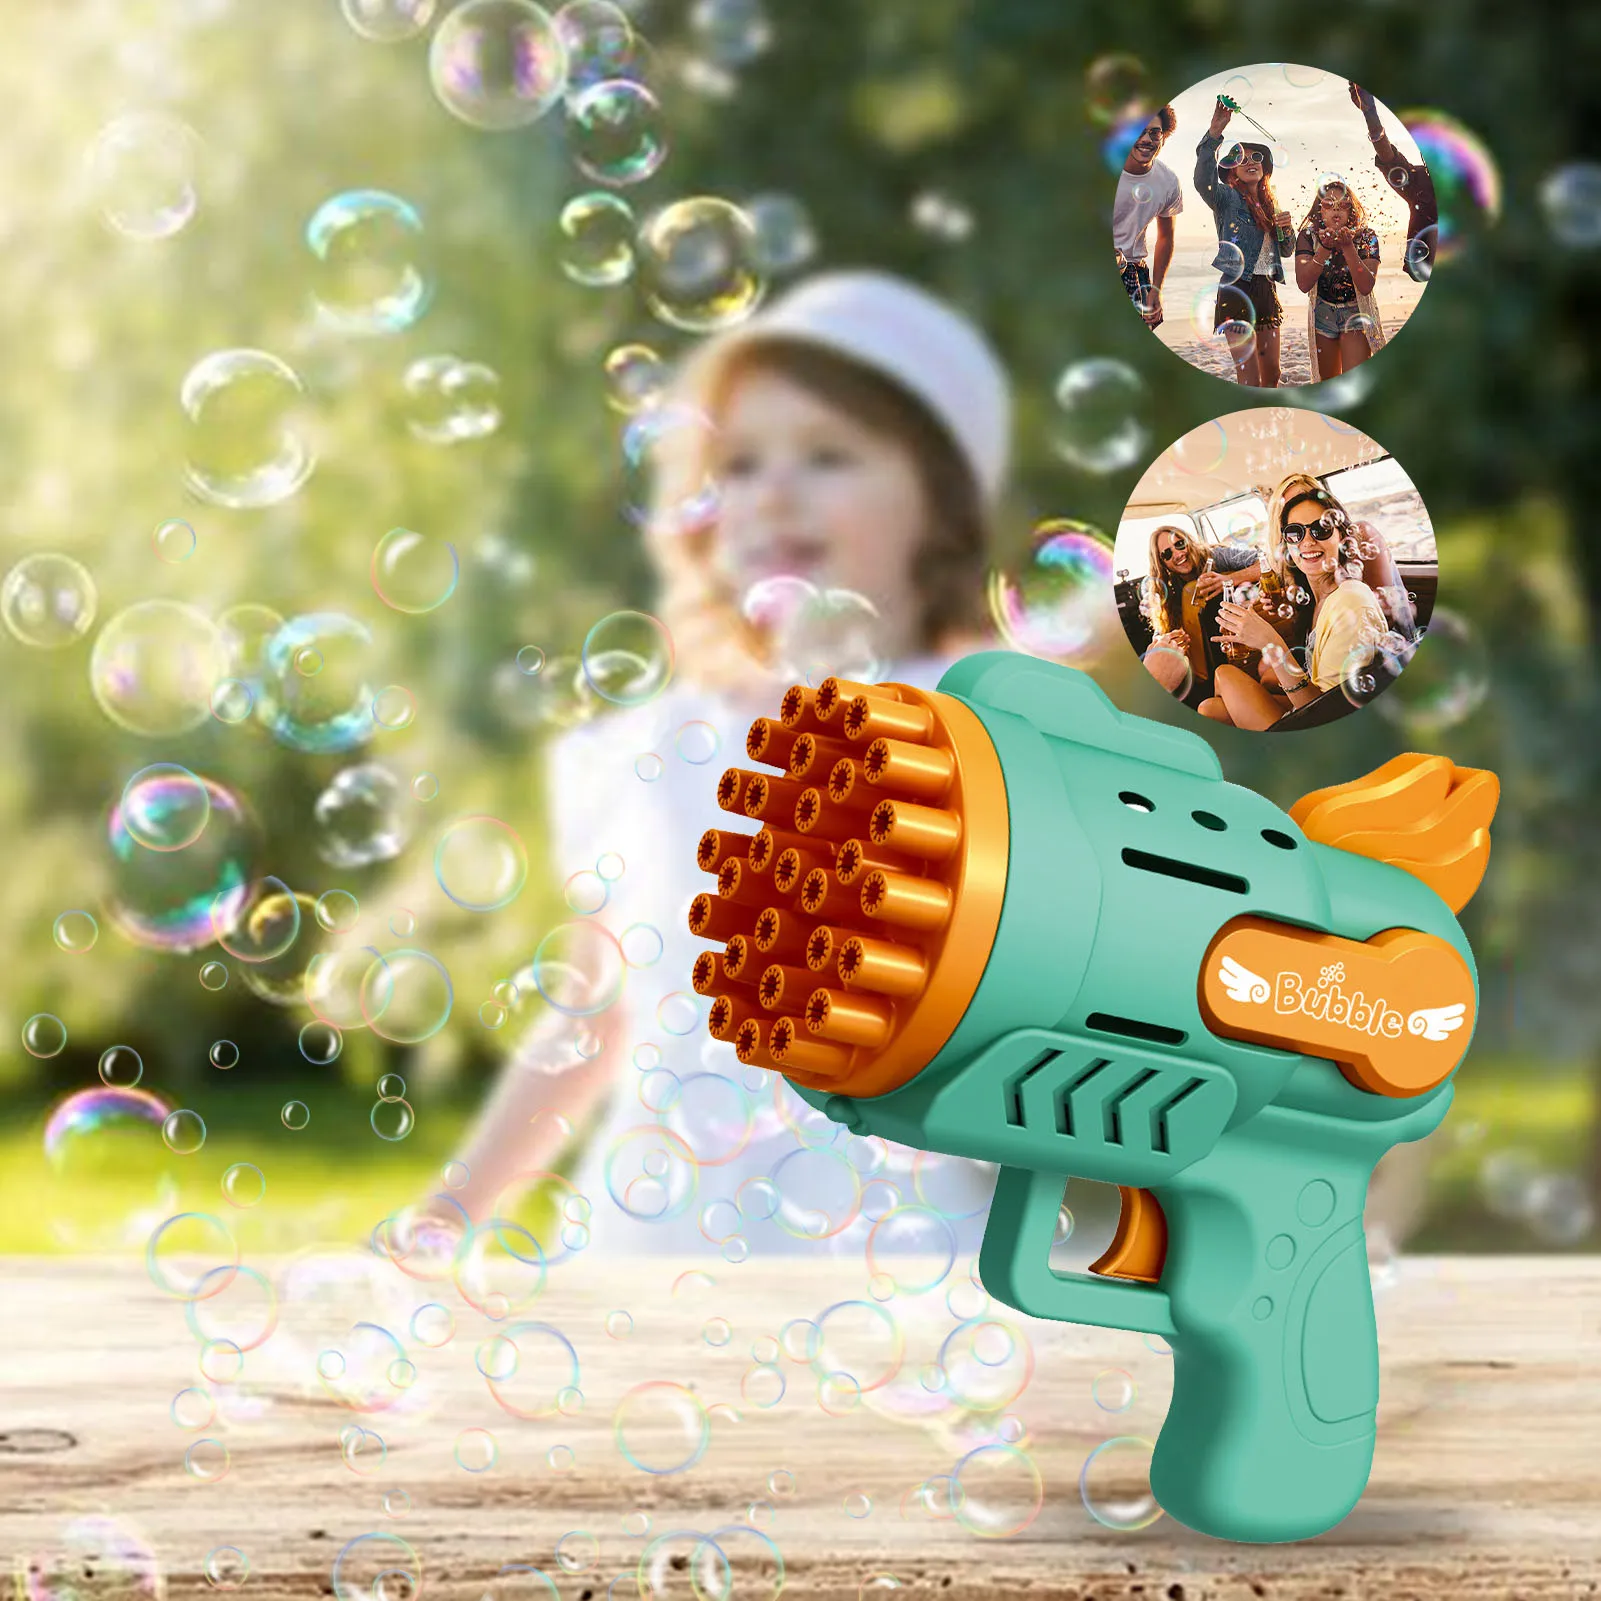 Bubble Gun Rocket 29 Hole Automatic Soap Bubbles Machine Outdoor Toy for Boys Birthday Gifts Wedding Party Children Summer Gift bubble making toy bubble makers table tennis toys bubble toy parent child interactive bubble machine for kids outdoor party